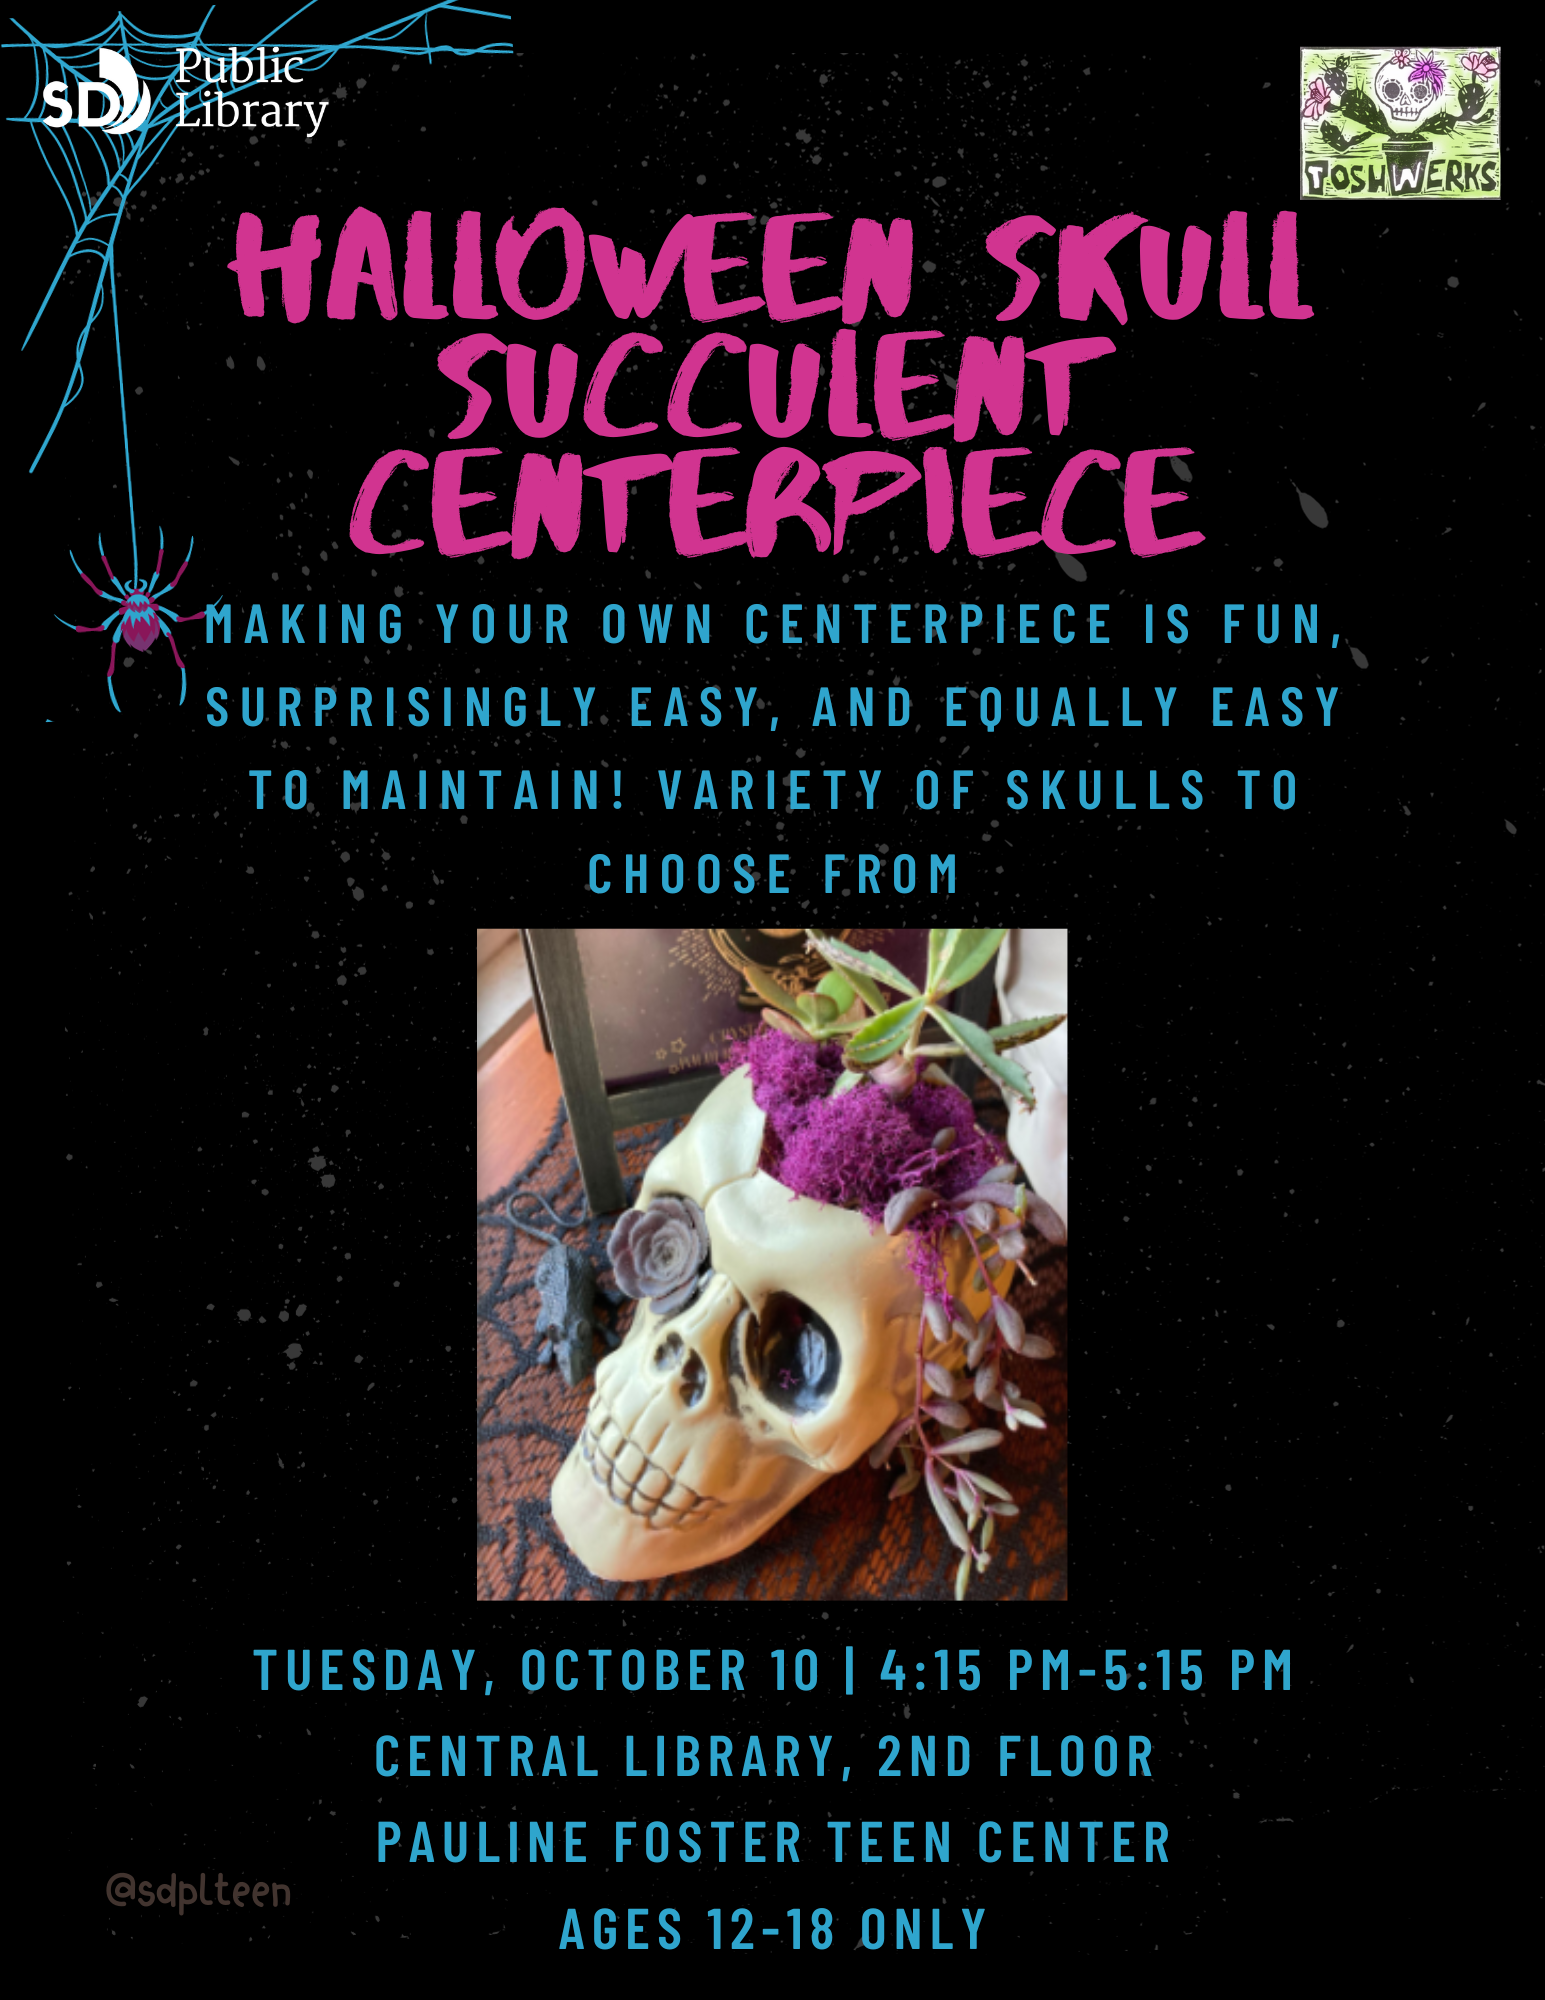 Halloween Skull Succulent Centerpiece. Making your own centerpiece is fun, surprisingly easy, and equally easy to maintain! Variety of skulls to choose from. Tuesday, October 10. 4:15 PM-5:15 PM. Central Library, 2nd Floor. Pauline Foster Teen Center. Ages 12-18 only.